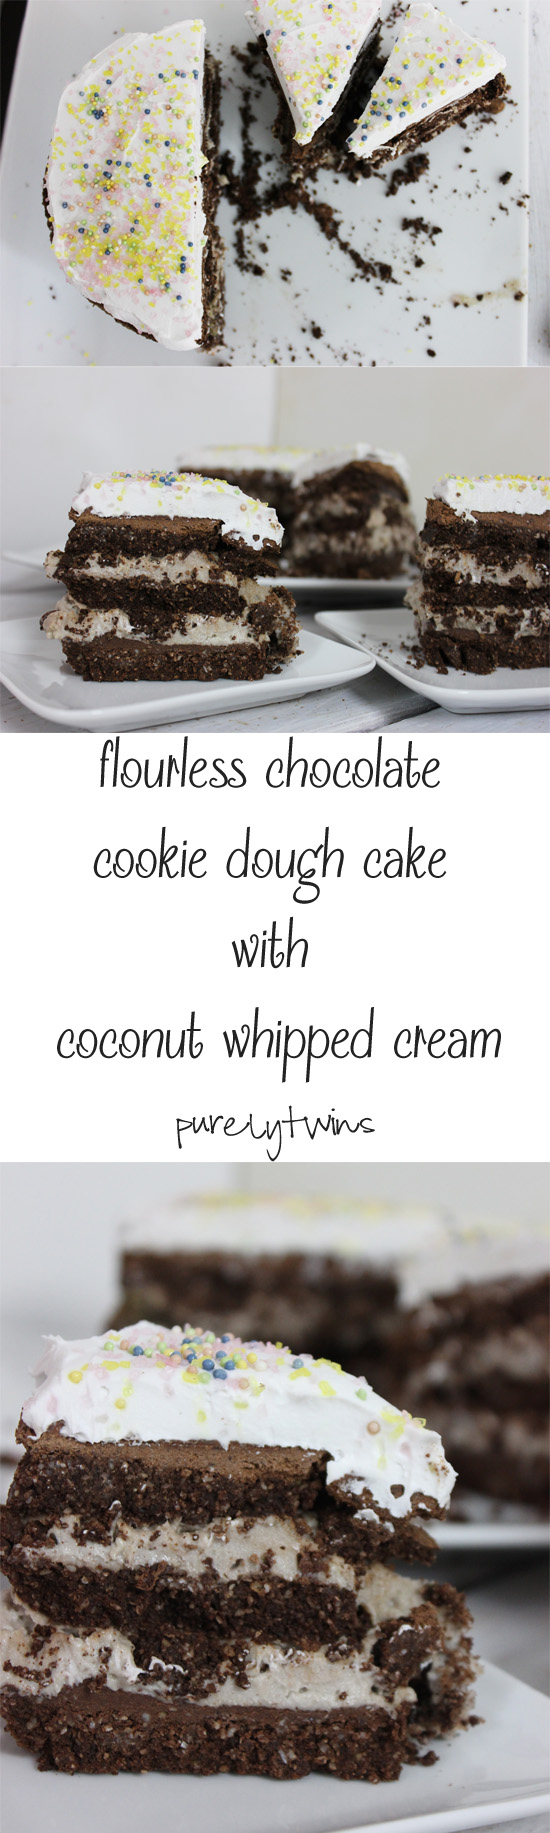 How to make the ultimate "messy" unbaked flourless chocolate cookie dough layered cake with chocolate fudge and homemade whipped cream #glutenfree #grainfree #dairyfree #soyfree #eggfree || purelytwins.com